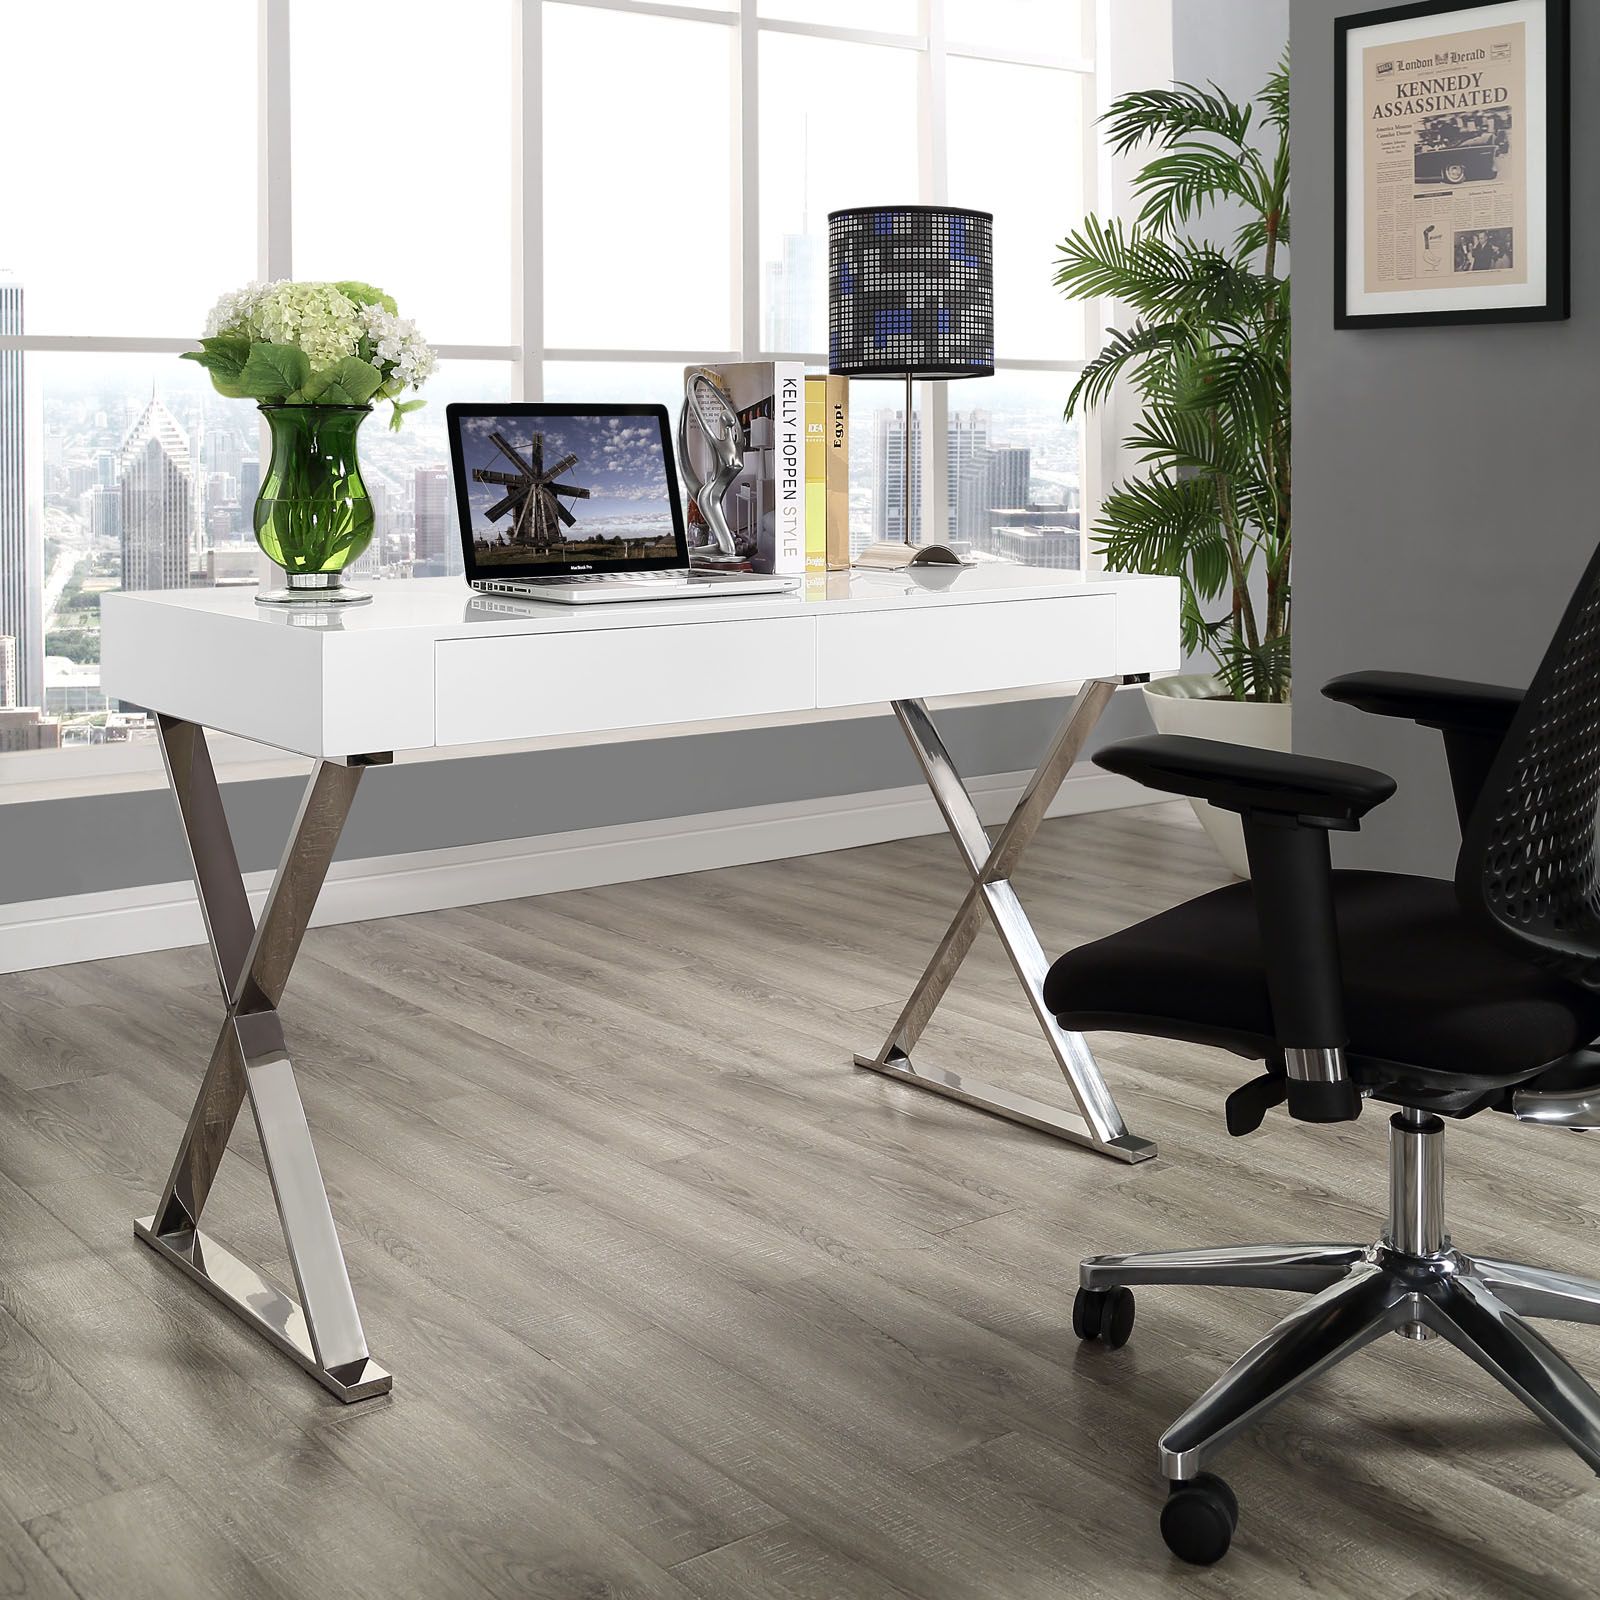 Glam Desk | Modern Furniture • Brickell Collection With Regard To White Wood And Gold Metal Office Desks (View 1 of 15)